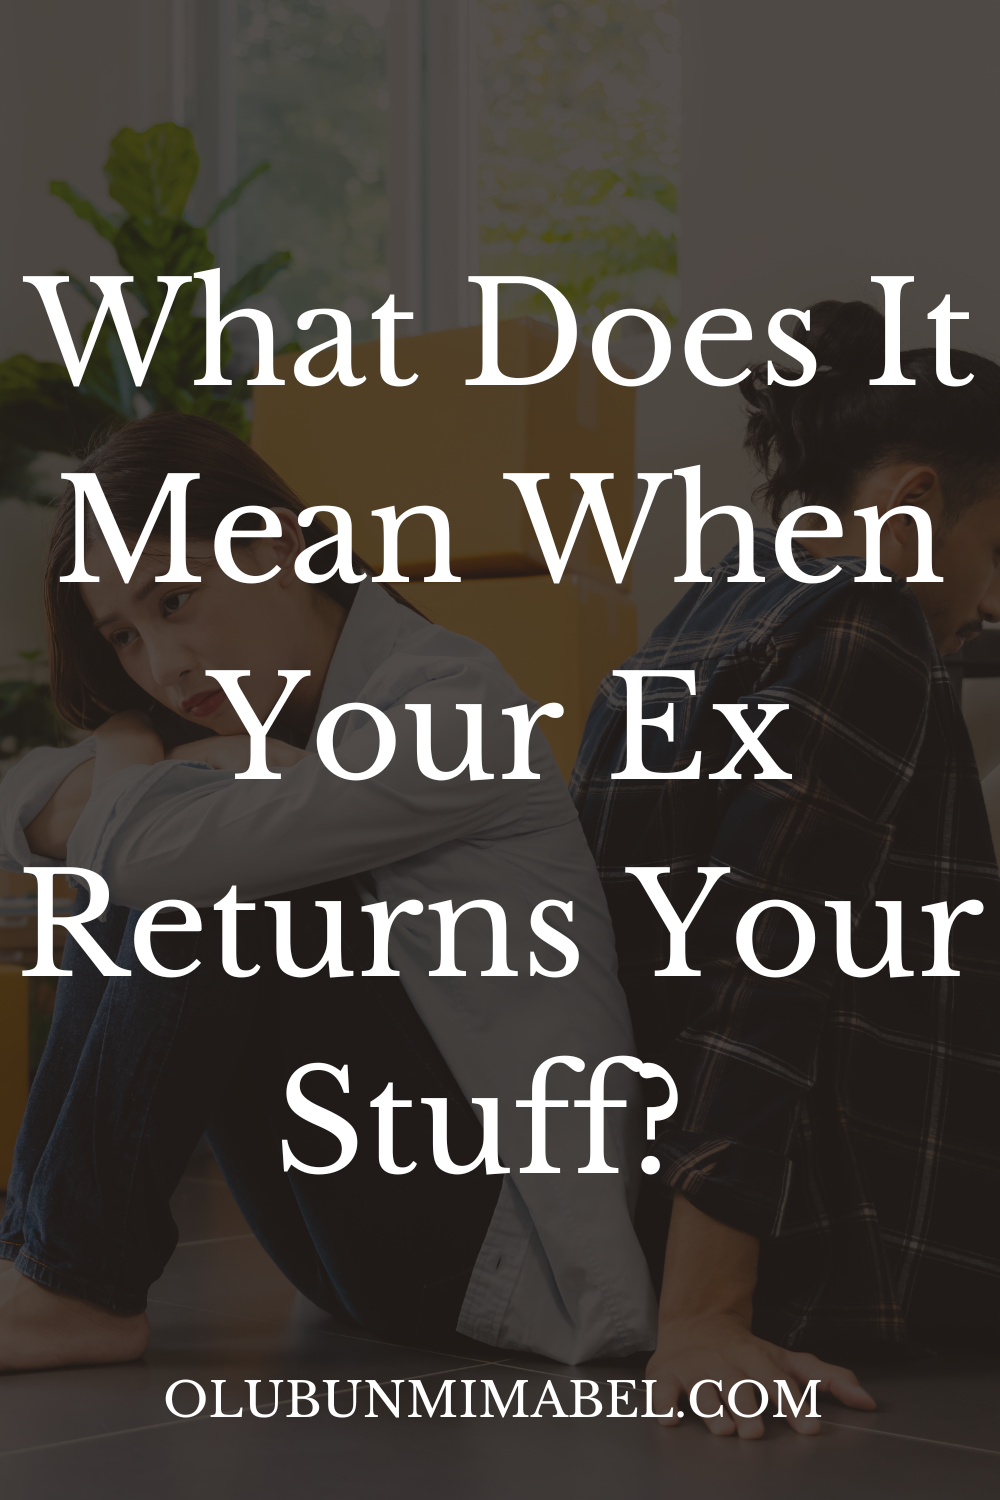 What Does It Mean When Your Ex Returns Your Stuff?